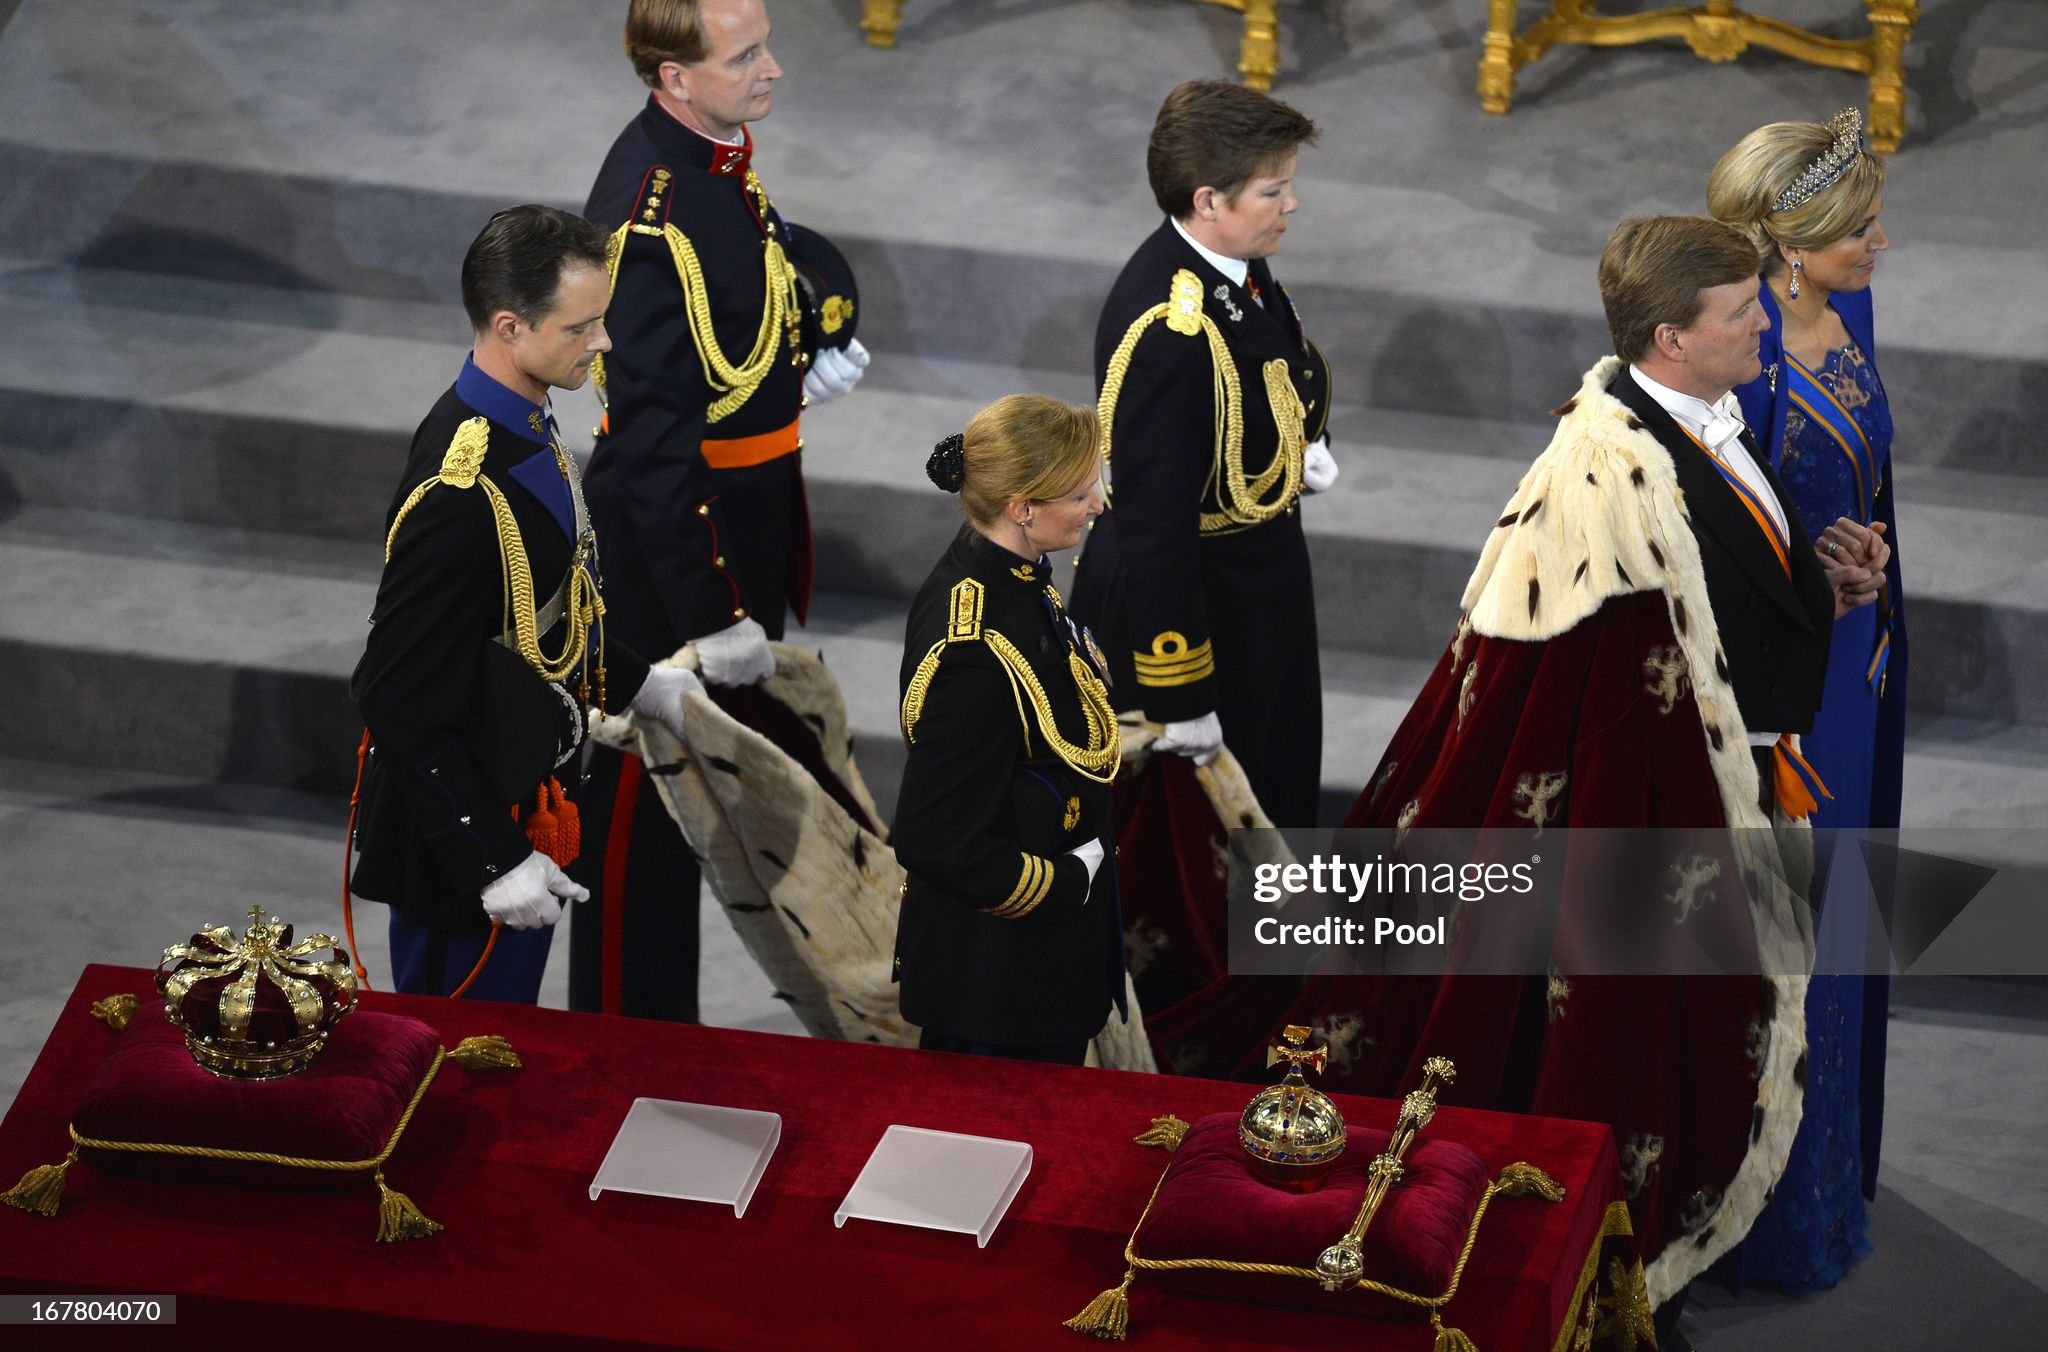 king-willem-alexander-of-the-netherlands-and-his-wife-queen-maxima-of-the-netherlands-leave.jpg